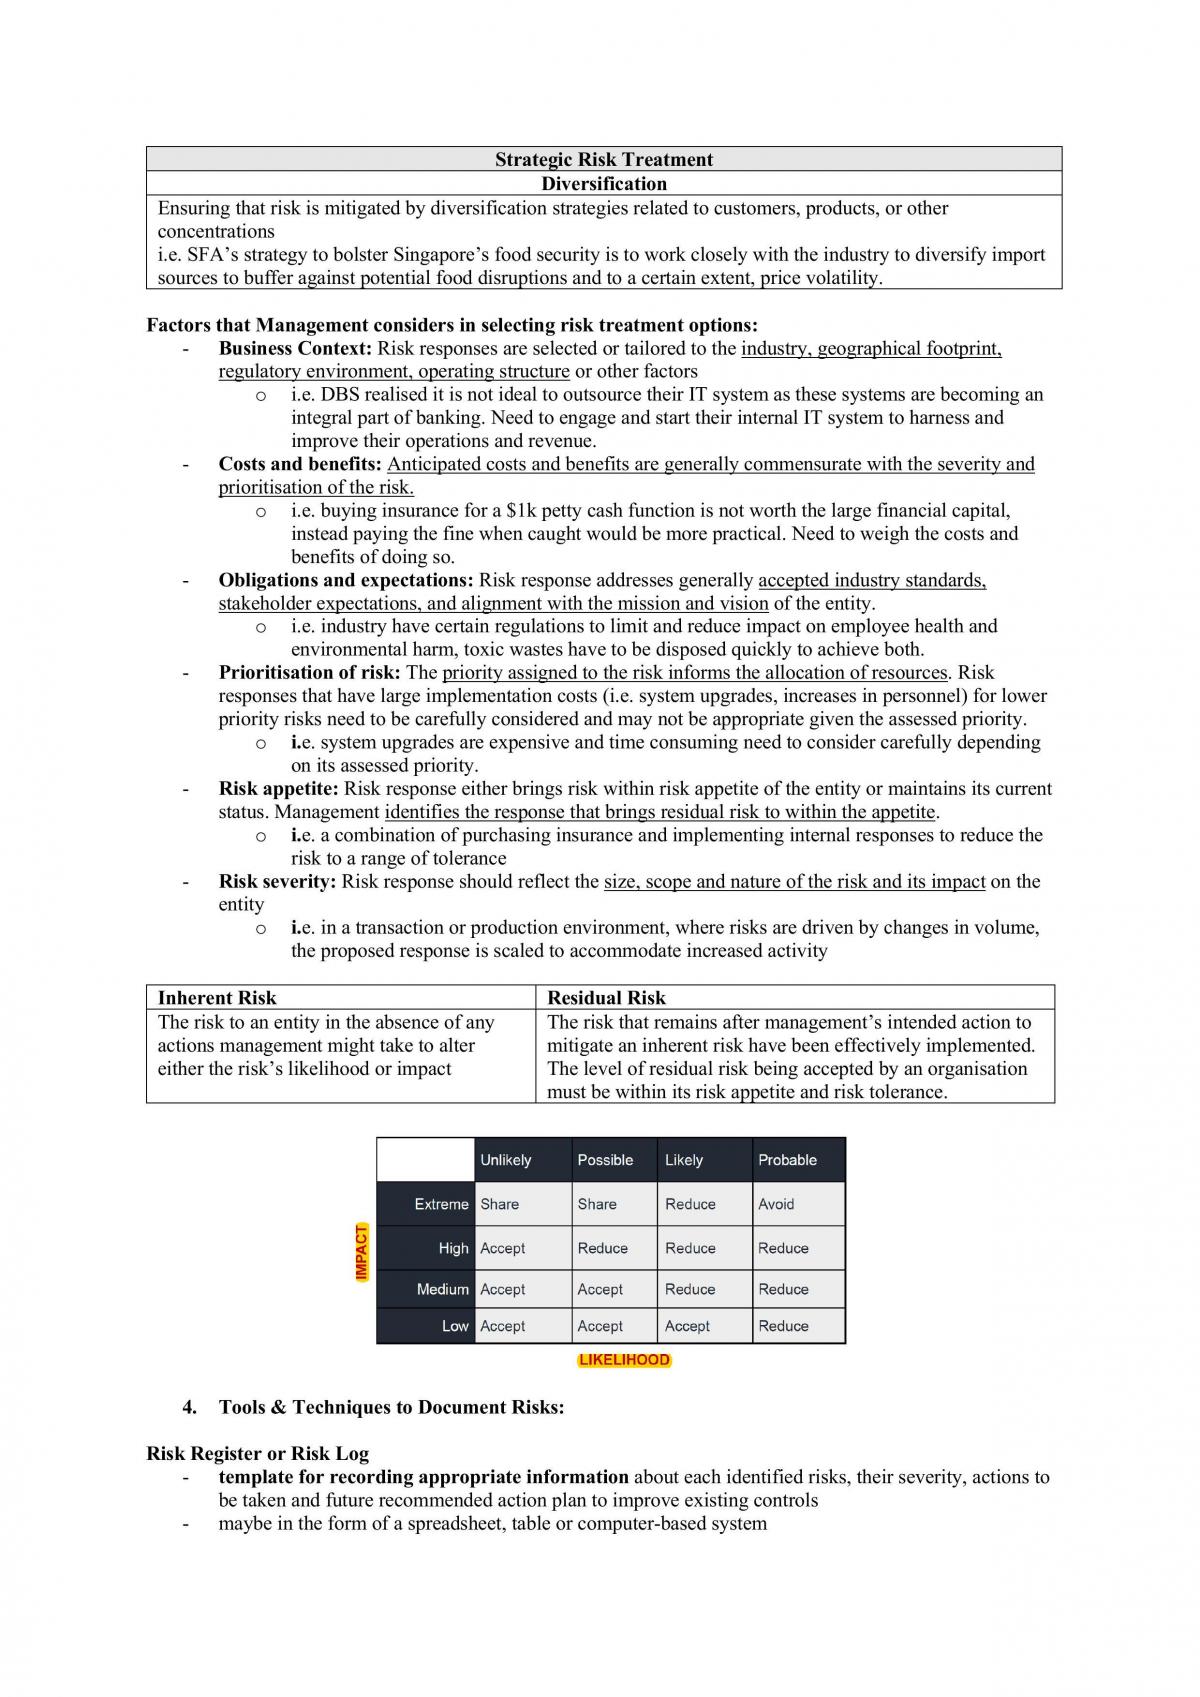 ACC3706 - Corporate Governance and Risk Management notes - Page 24